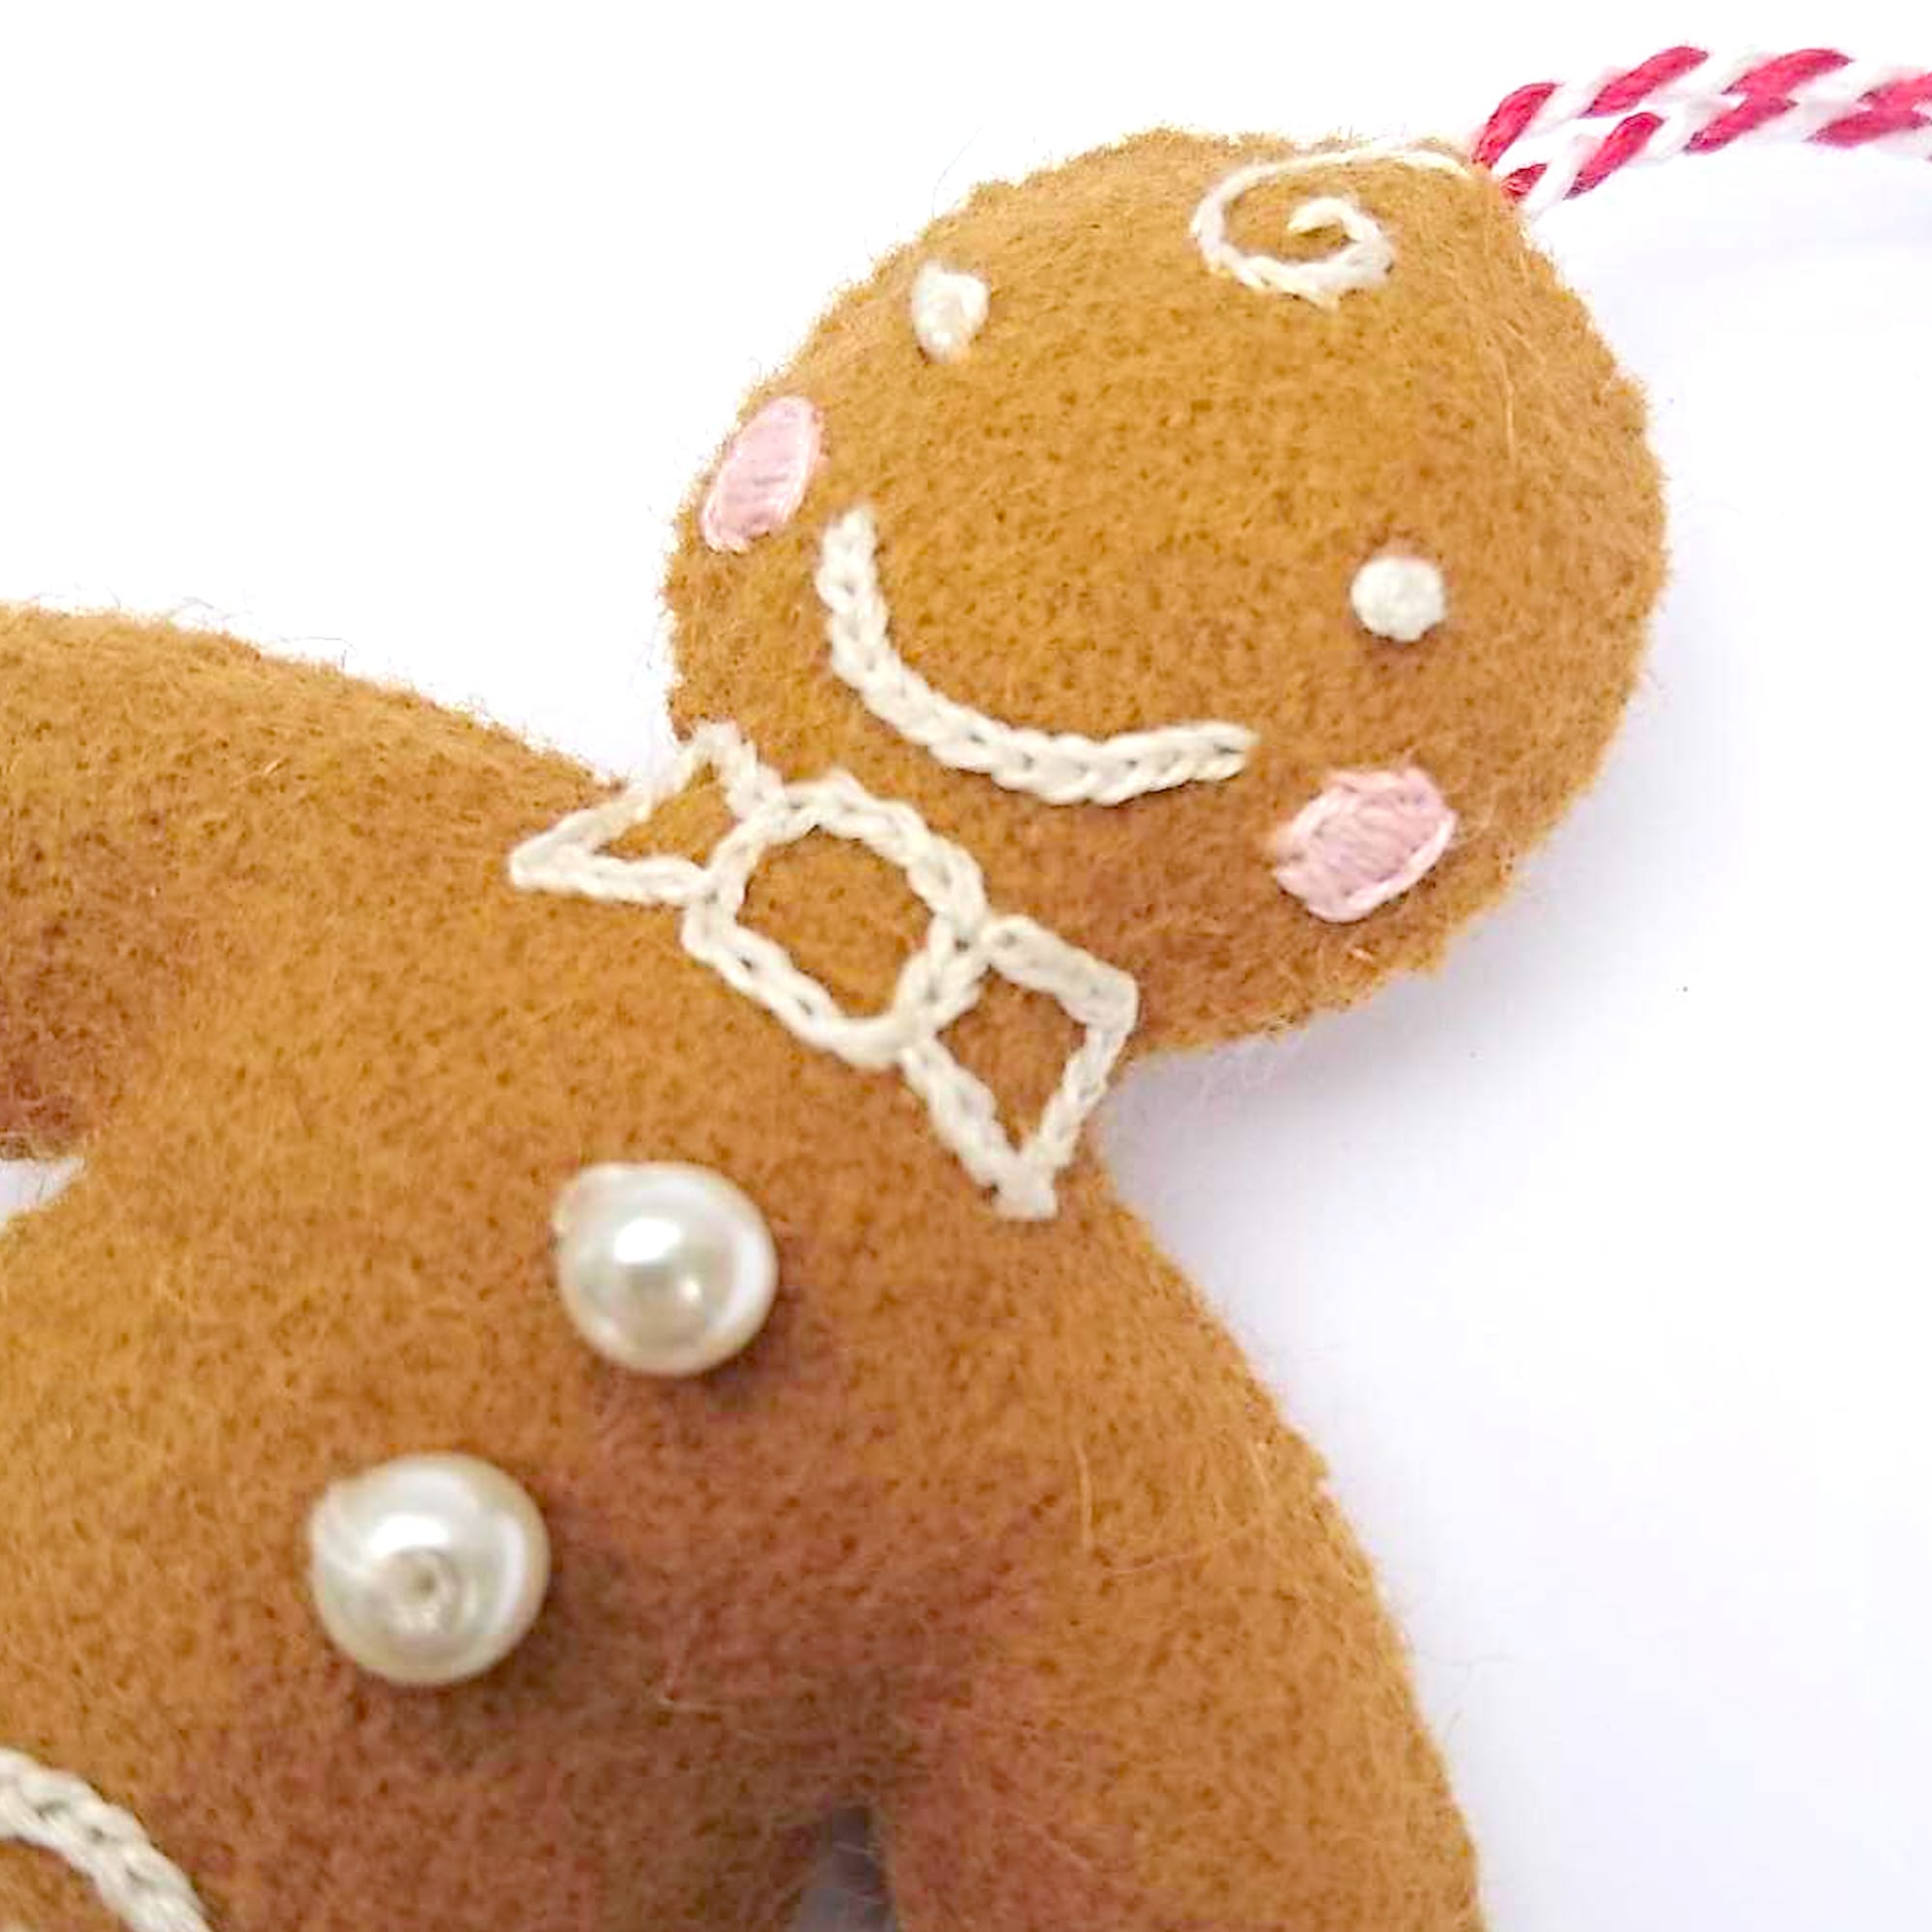 Fine-Cell-Work-Handmade-Charity-Christmas-Decoration-Embroidered-Gingerbread-Man-Detail.jpg